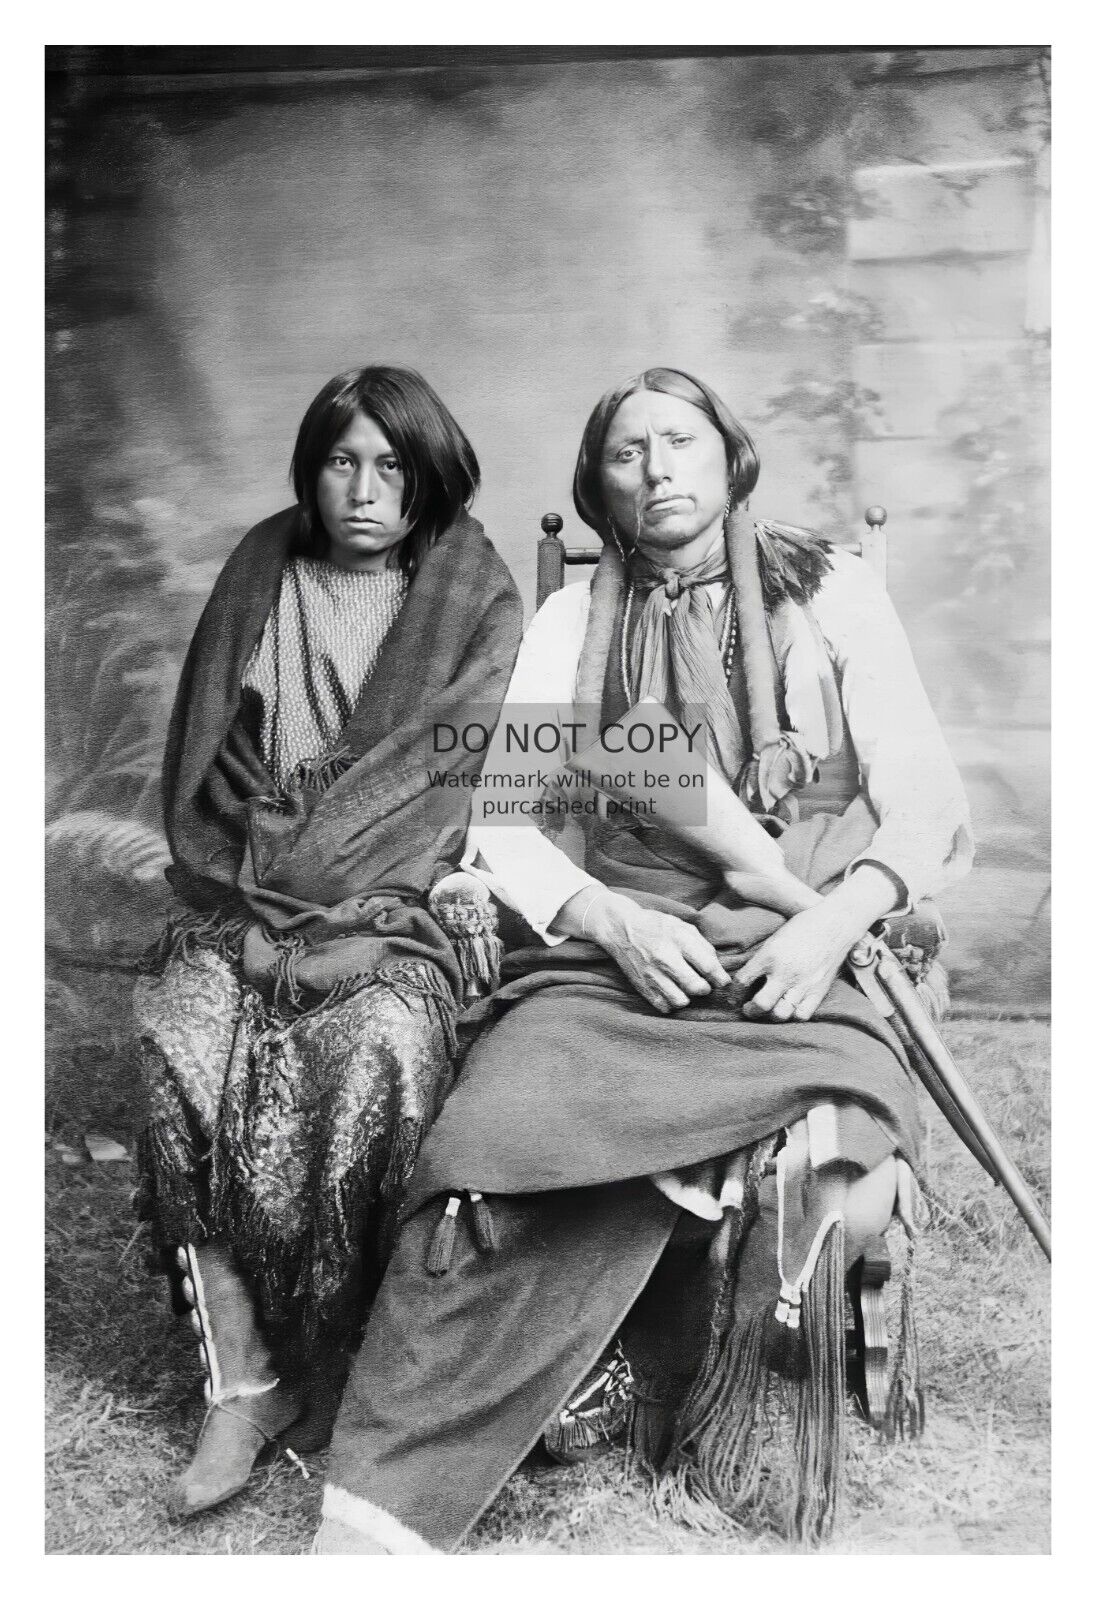 CHIEF QUANAH PARKER NATIVE AMERICAN LEADER AND HIS WIFE 4X6 PHOTO